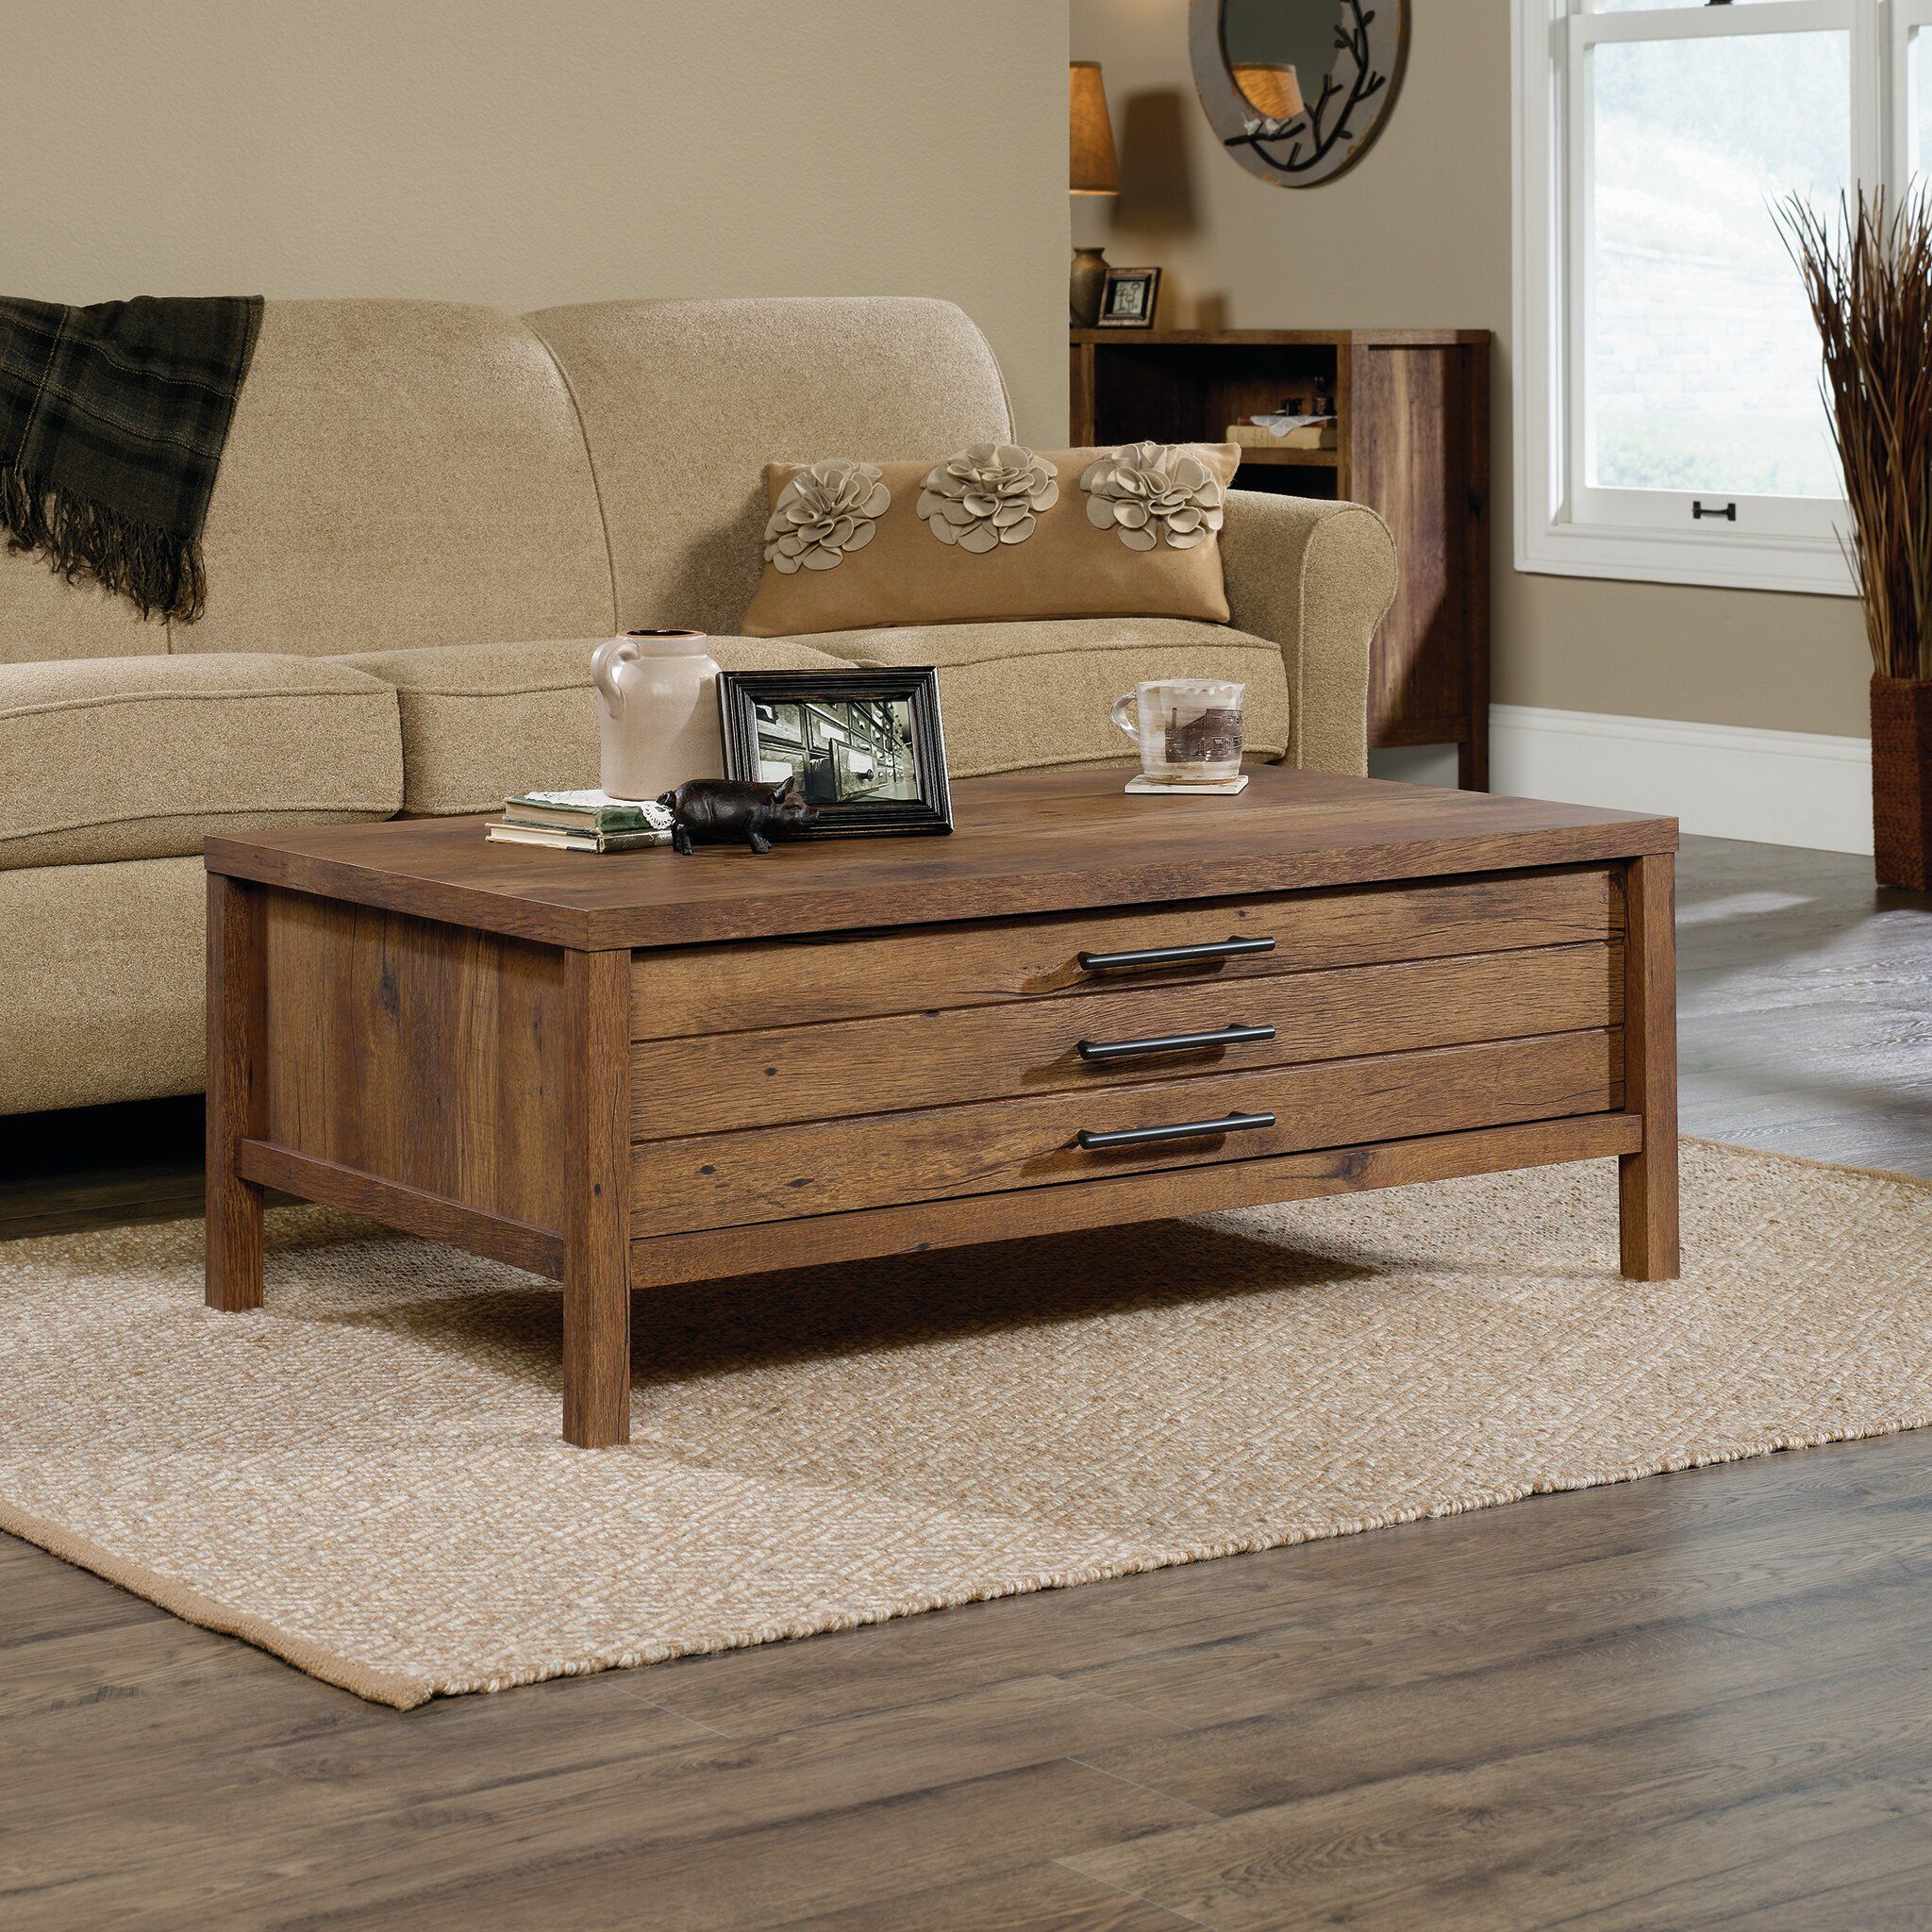 Laurel Foundry Modern Farmhouse Odile Coffee Table & Reviews | Wayfair With Regard To Modern Farmhouse Coffee Tables (View 8 of 20)